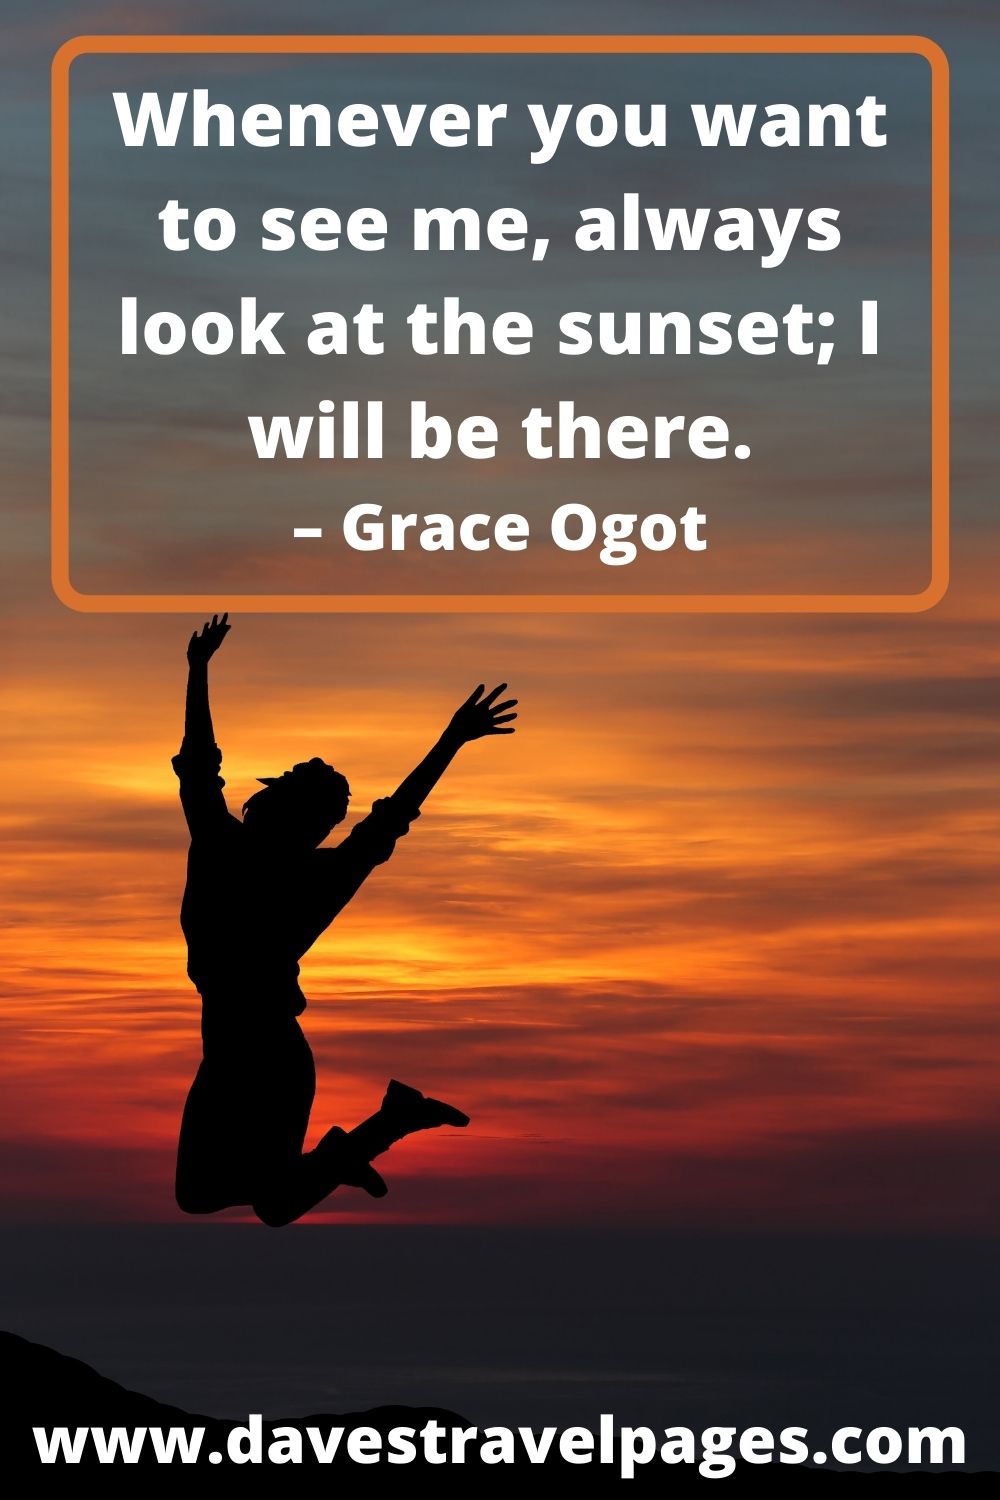 Whenever you want to see me, always look at the sunset; I will be there. – Grace Ogot